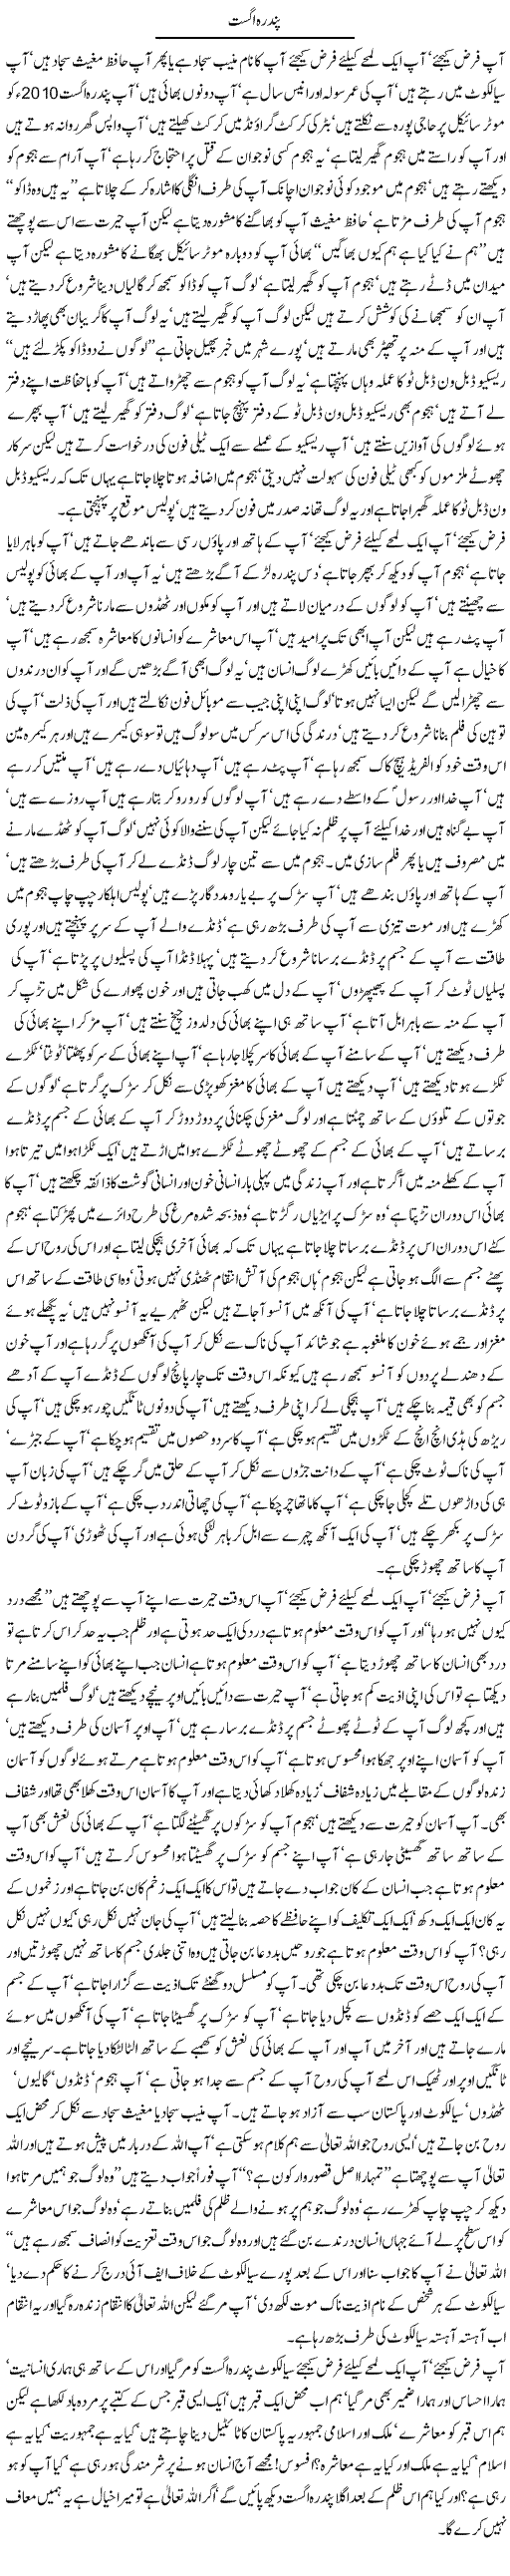 Fifteen August Express Column Javed Chaudhry 24 August 2010